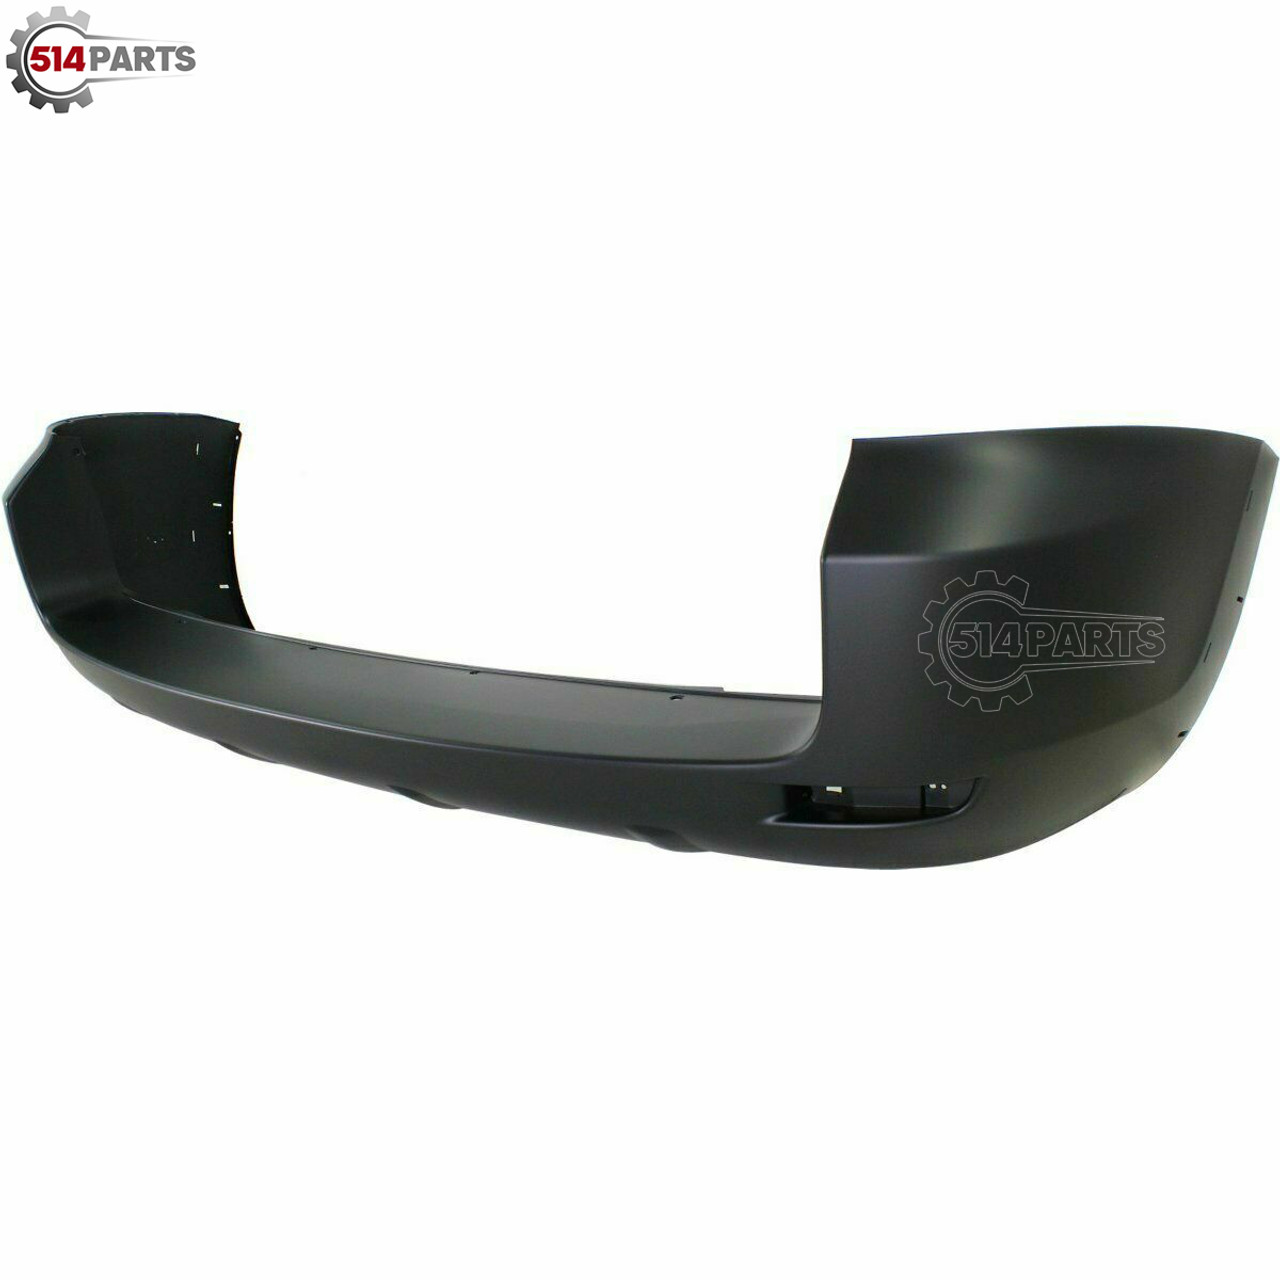 2006 - 2012 TOYOTA RAV4 SPORT AND LIMITED MODELS with FLARE HOLE PRIMED REAR BUMPER COVER without RR GATE MOUNTED SPARE TIRE - PARE-CHOC ARRIER PRIME